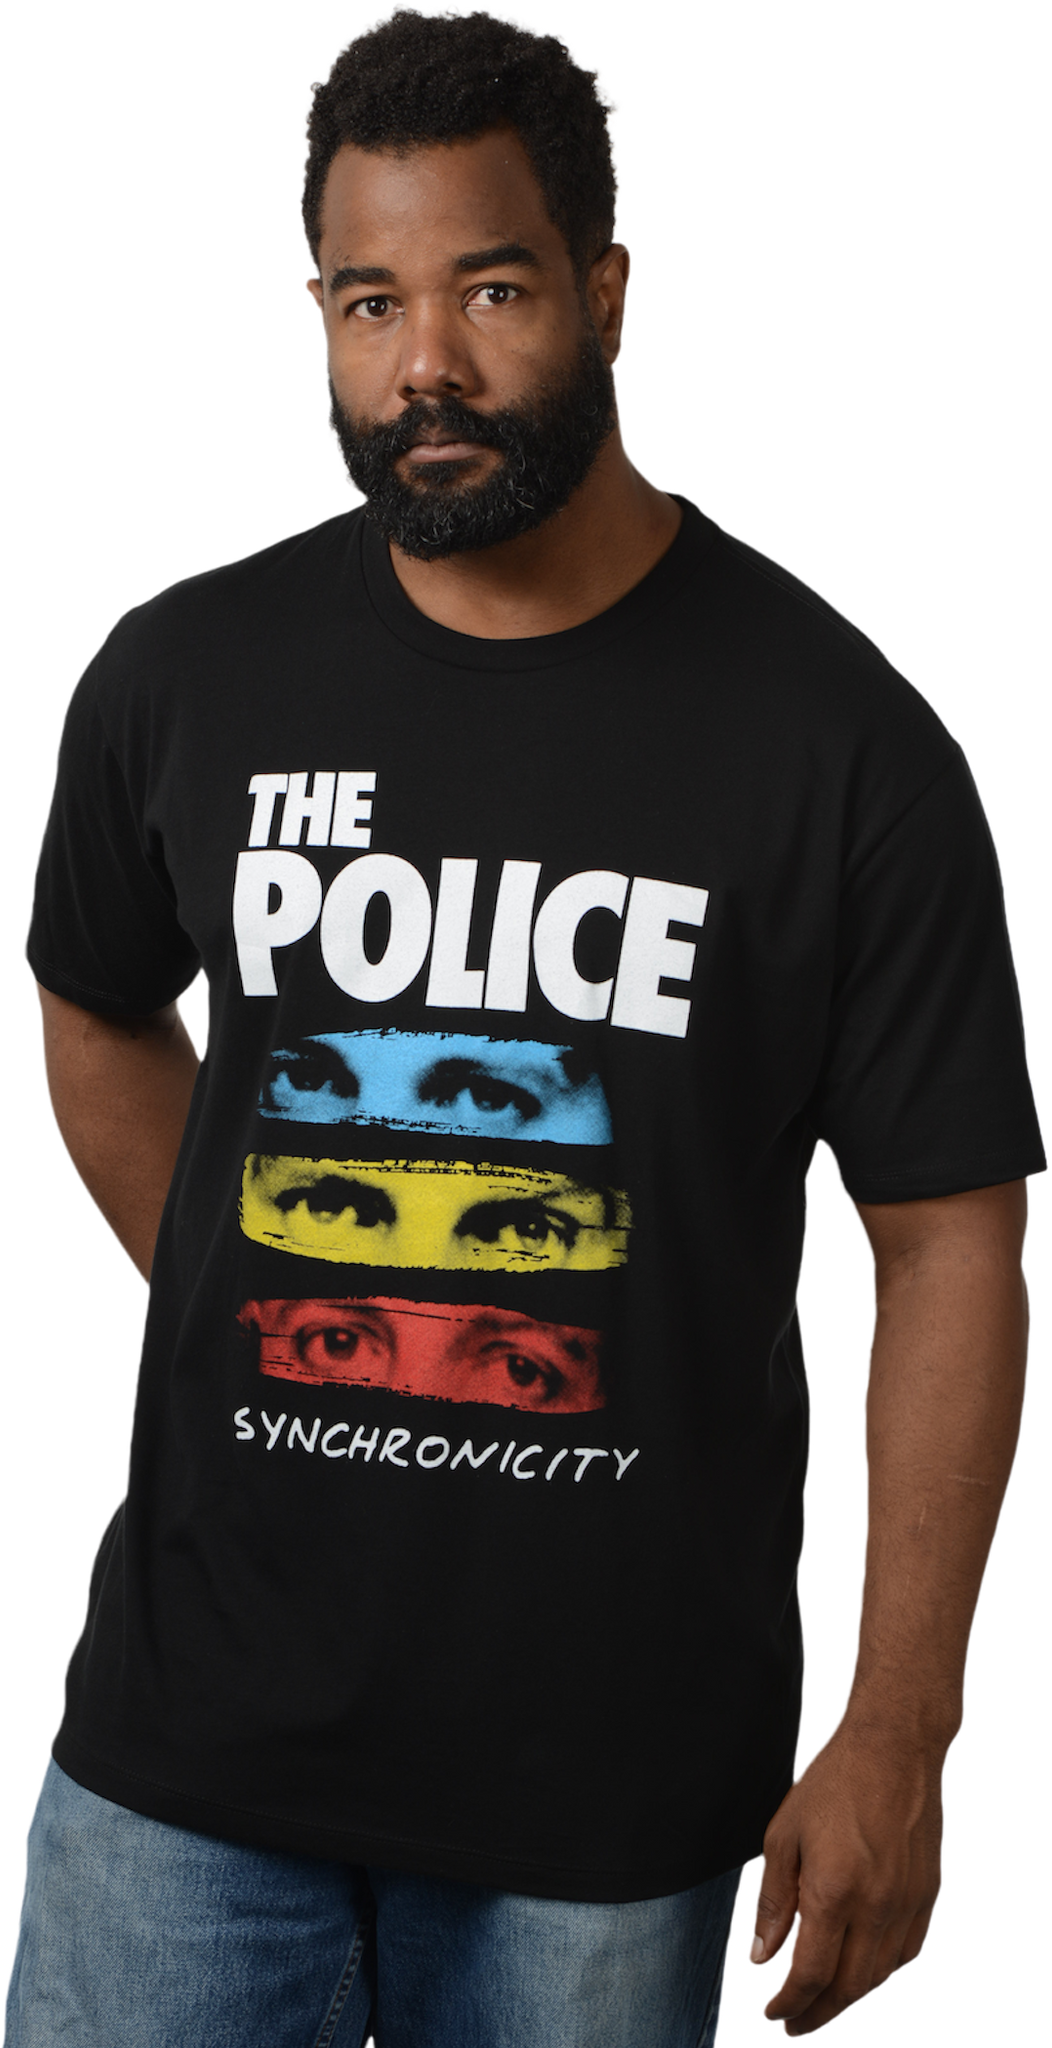 THE POLICE: "SYNCHRONICITY" T-SHIRT